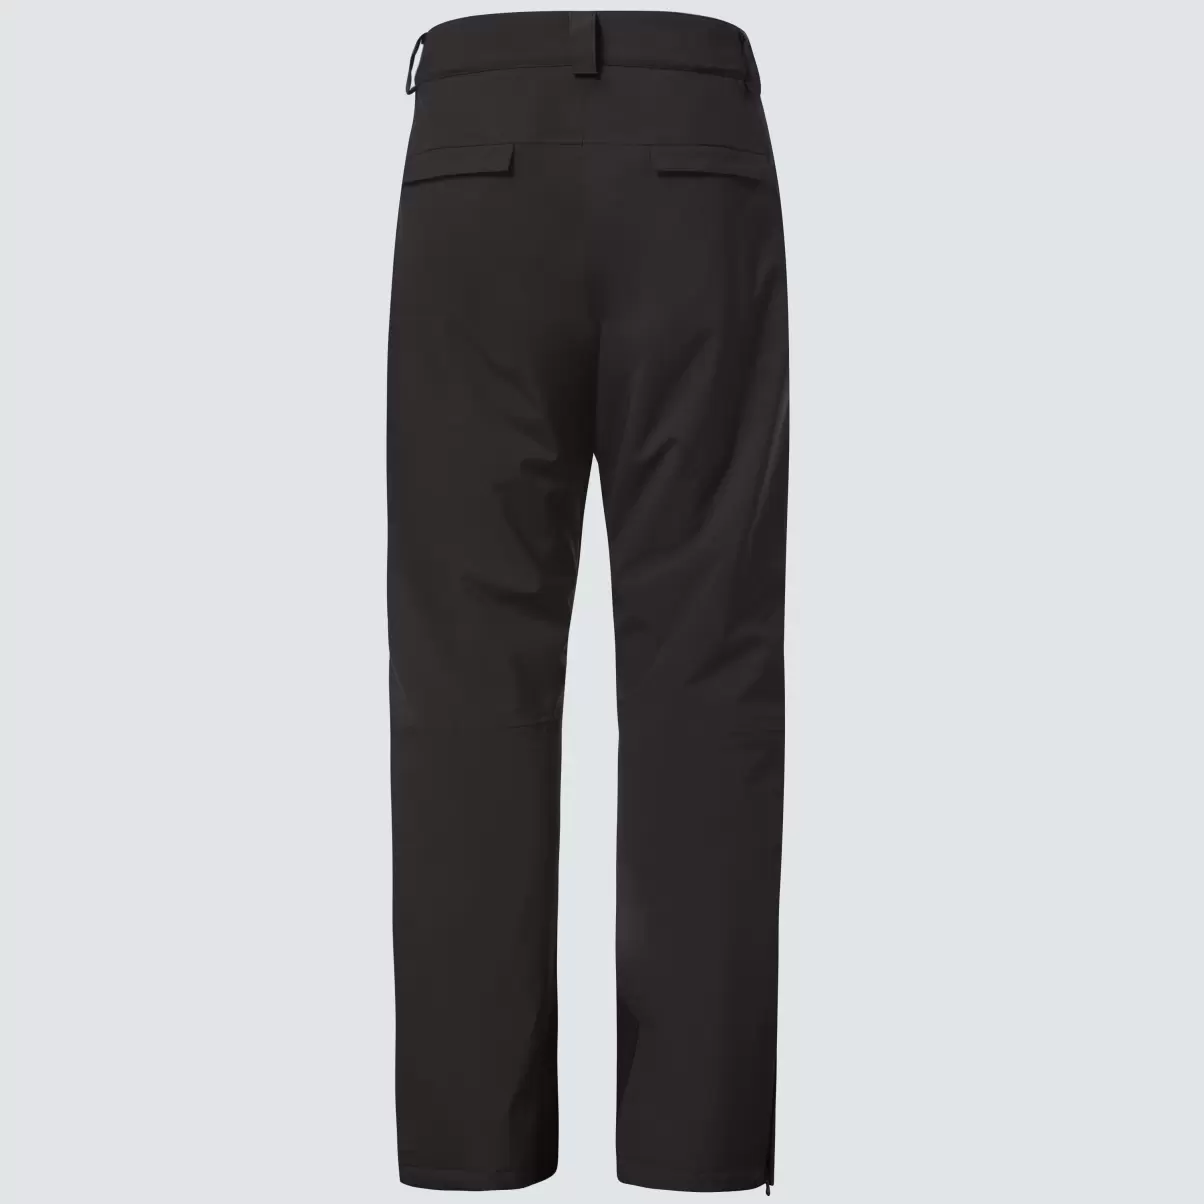 Men Oakley Axis Insulated Pant Pants Blackout - 3